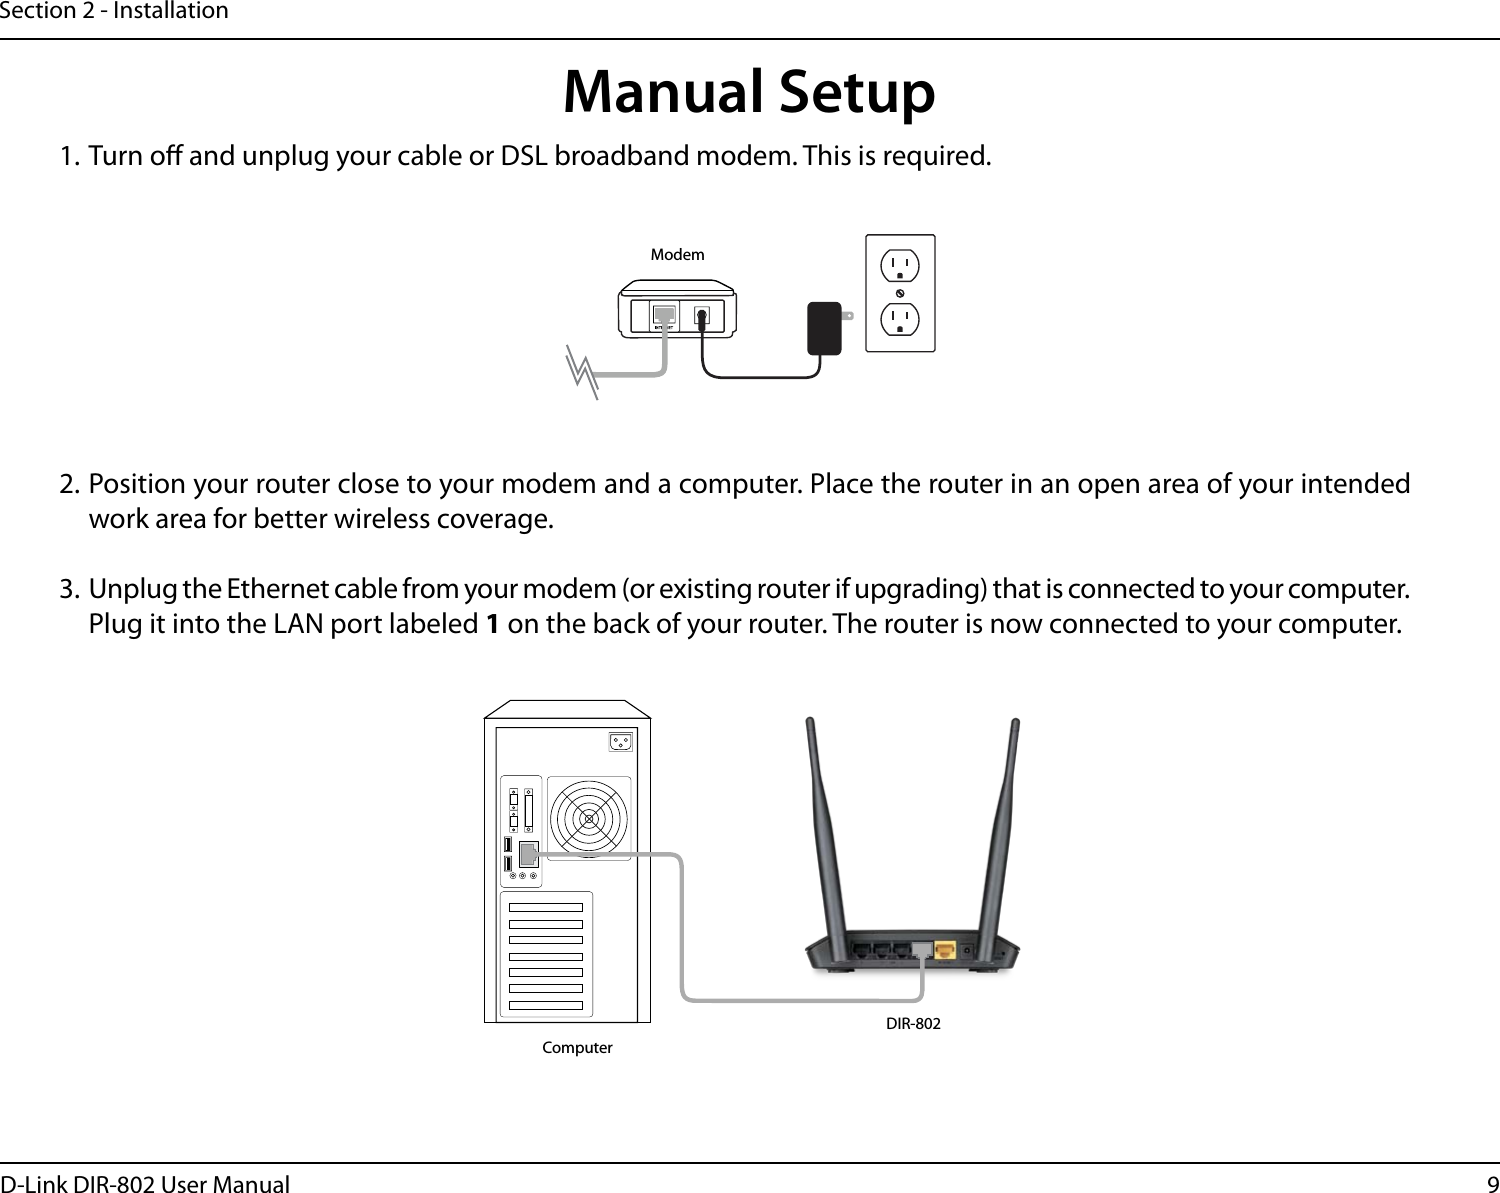 9D-Link DIR-802 User ManualSection 2 - Installation1. Turn o and unplug your cable or DSL broadband modem. This is required.Manual Setup2. Position your router close to your modem and a computer. Place the router in an open area of your intended work area for better wireless coverage.3. Unplug the Ethernet cable from your modem (or existing router if upgrading) that is connected to your computer. Plug it into the LAN port labeled 1 on the back of your router. The router is now connected to your computer.ModemDIR-802Computer